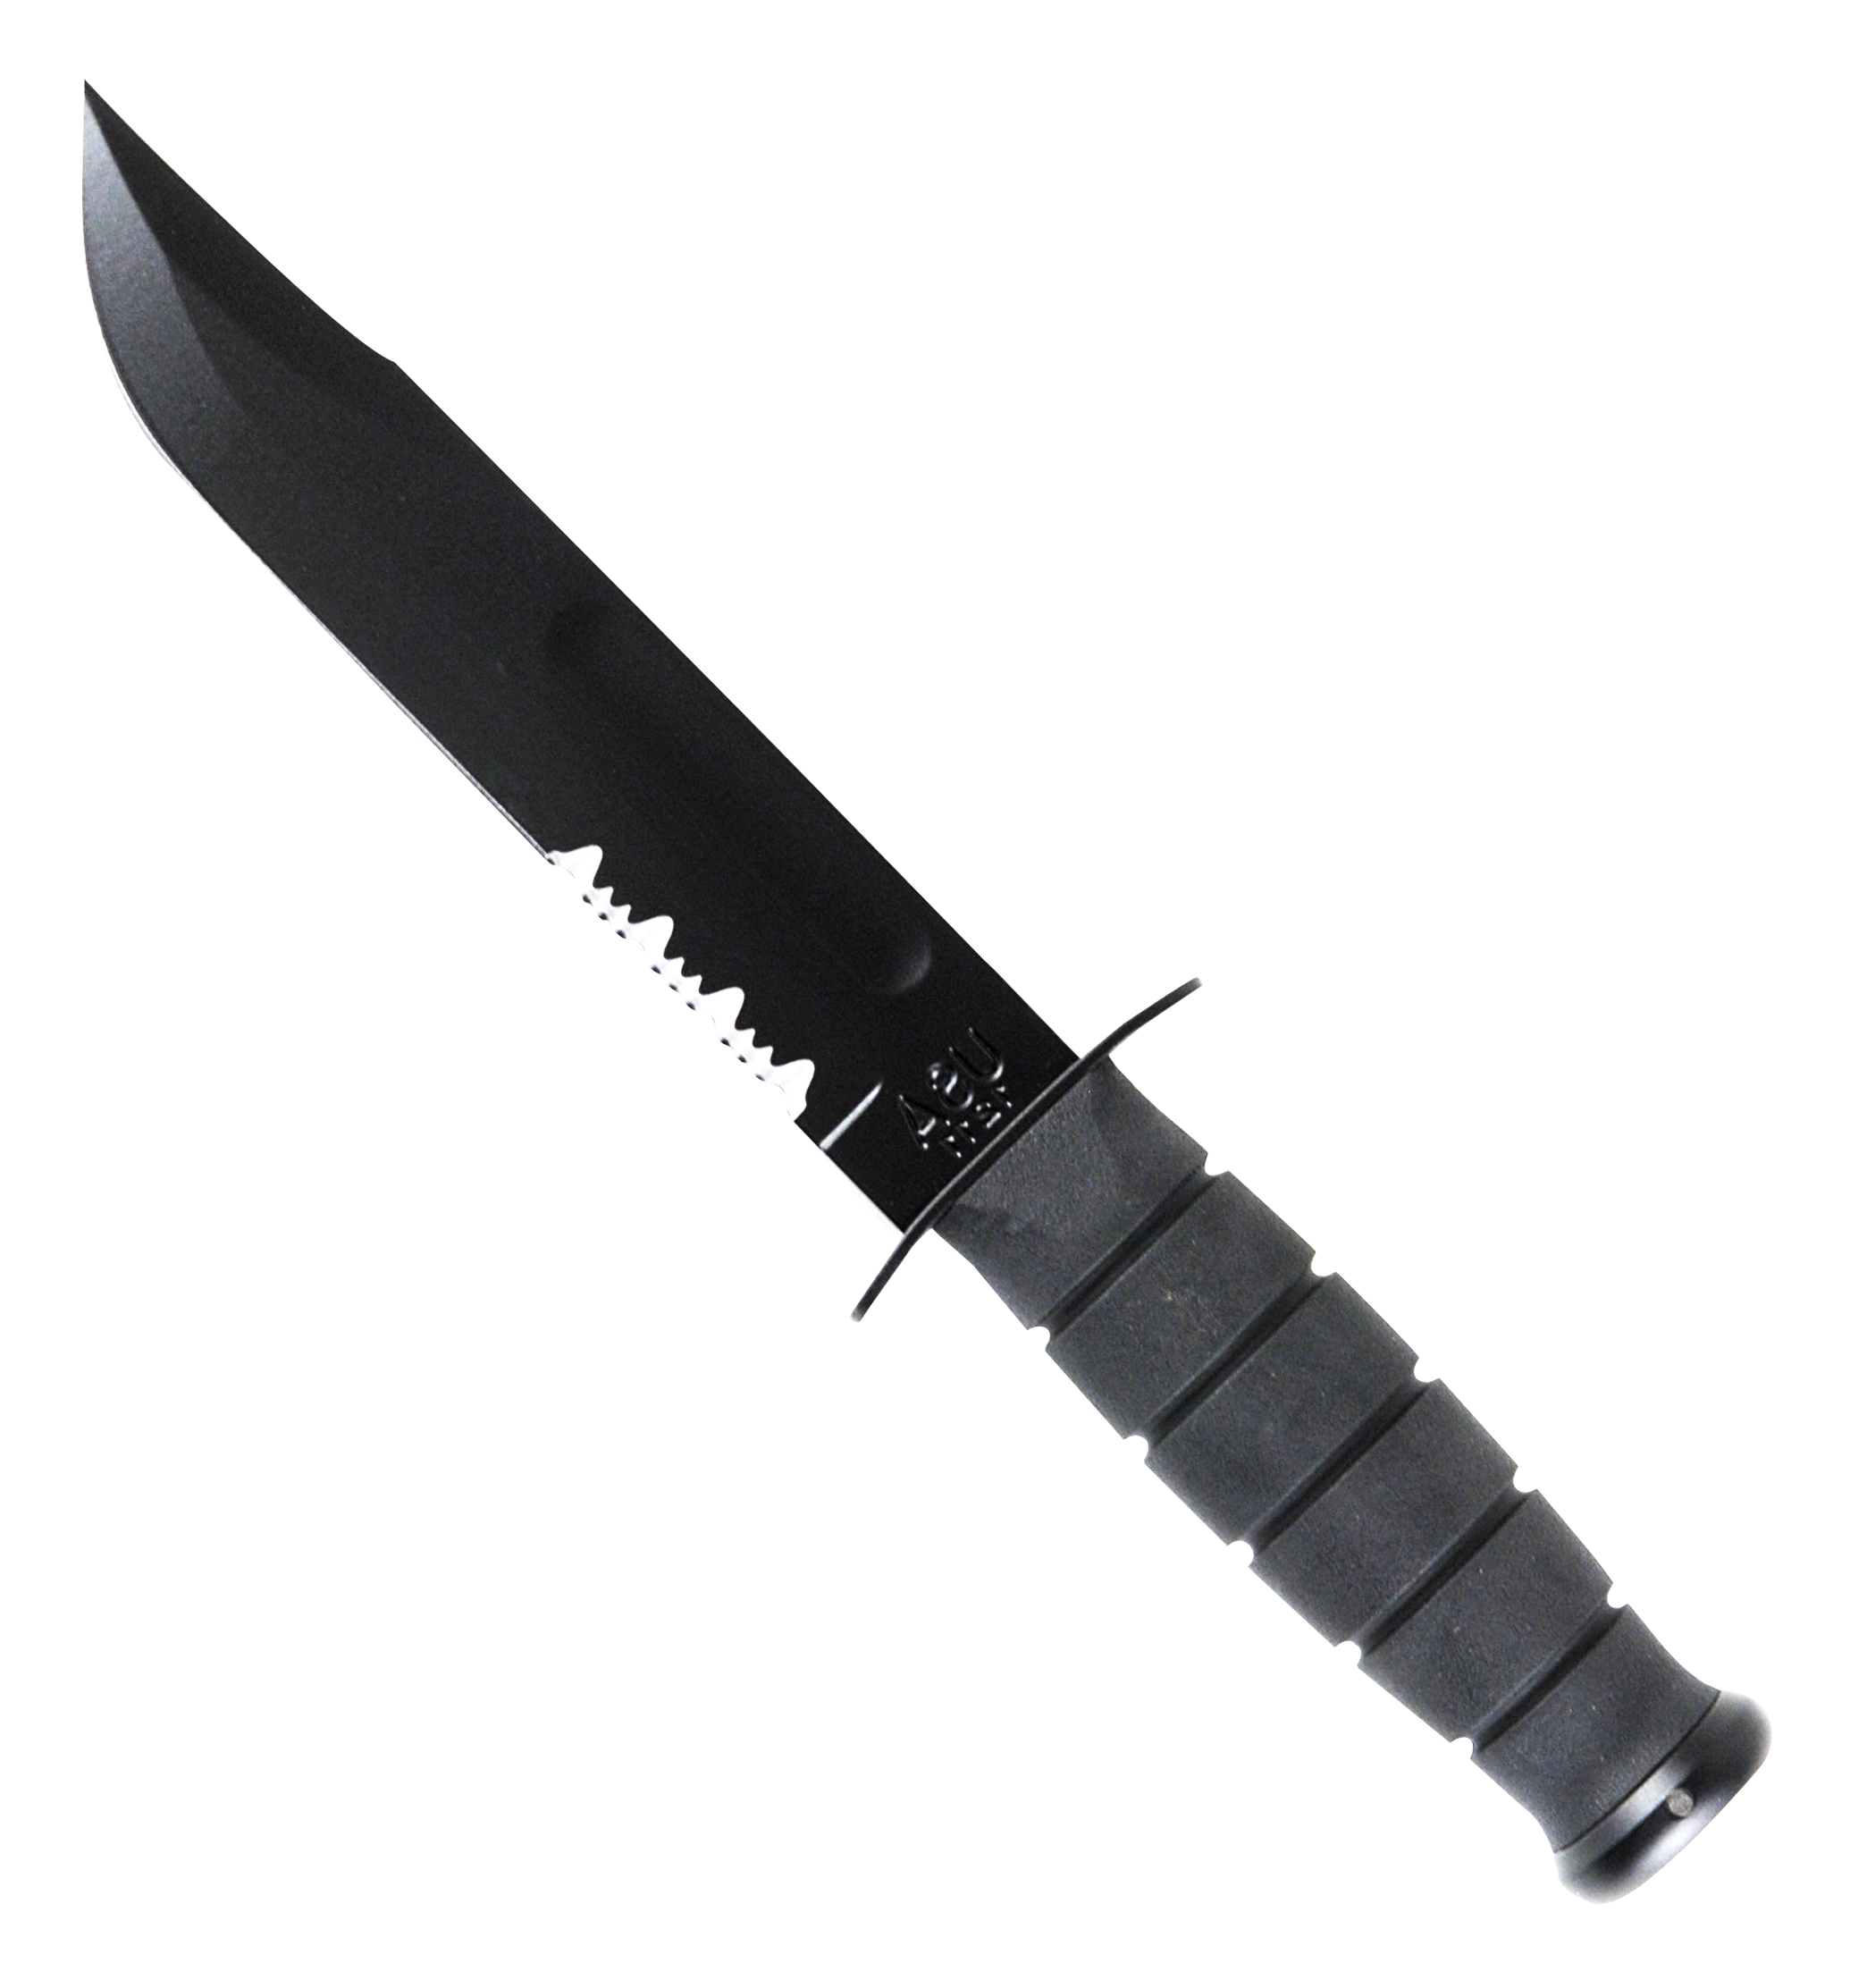 A Black Knife With A Black Handle